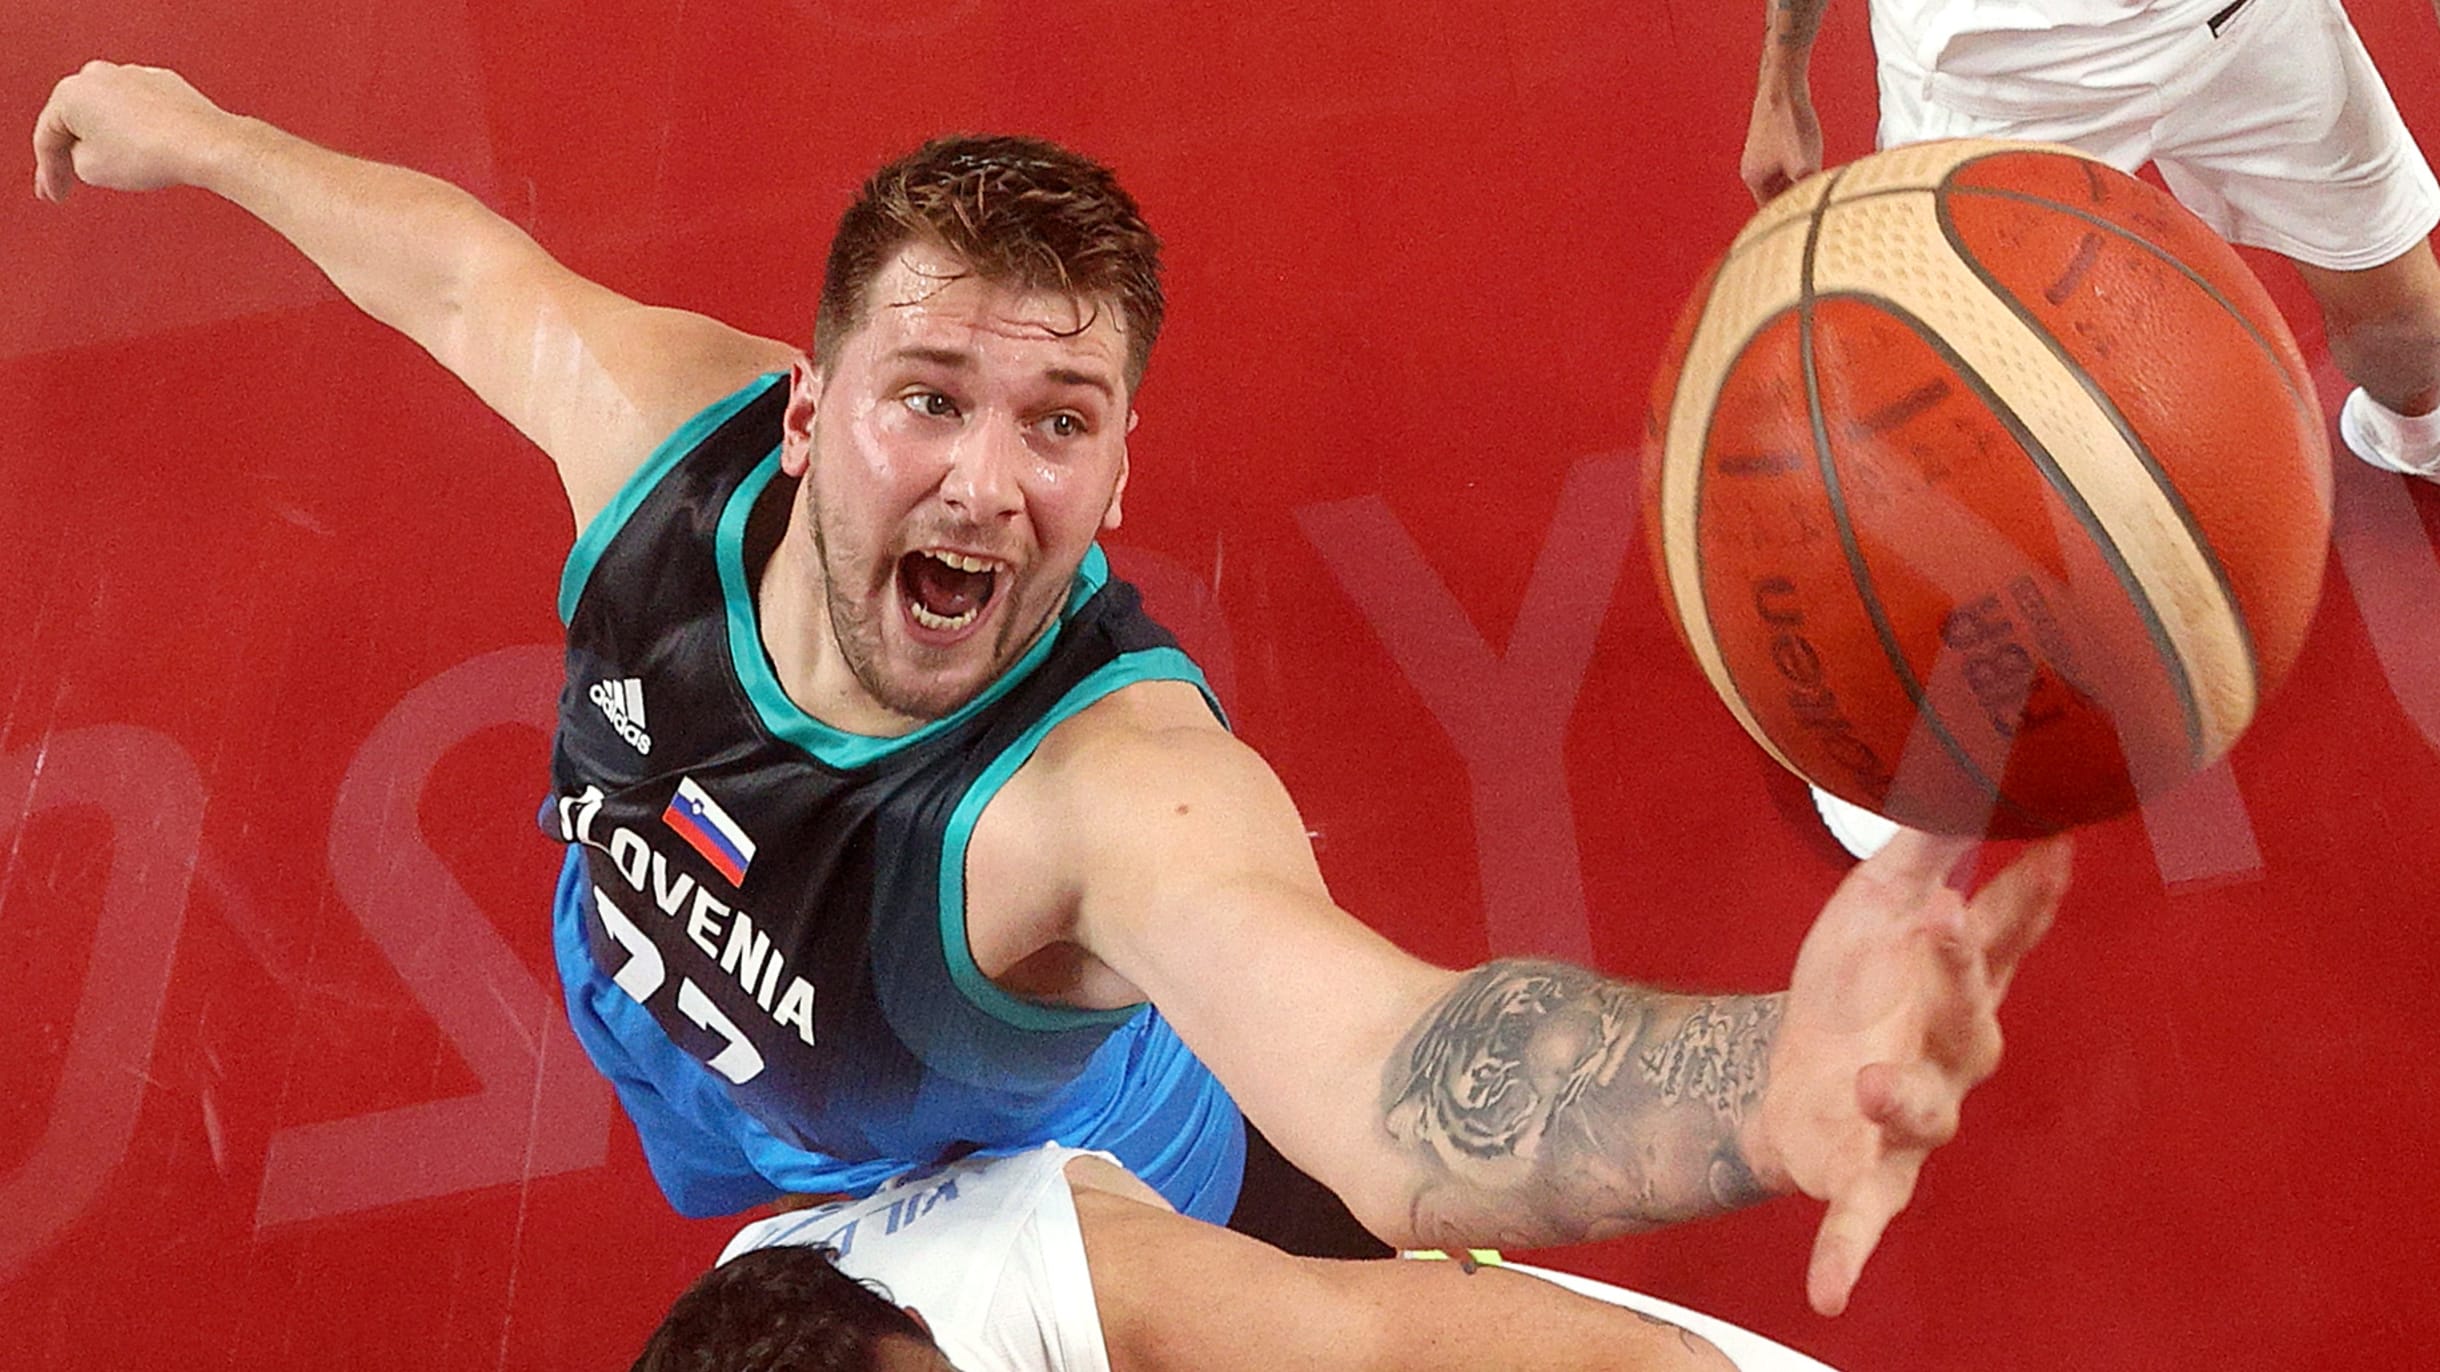 Luka Doncic highlights show how he's actually athletic in ways we don't  appreciate 